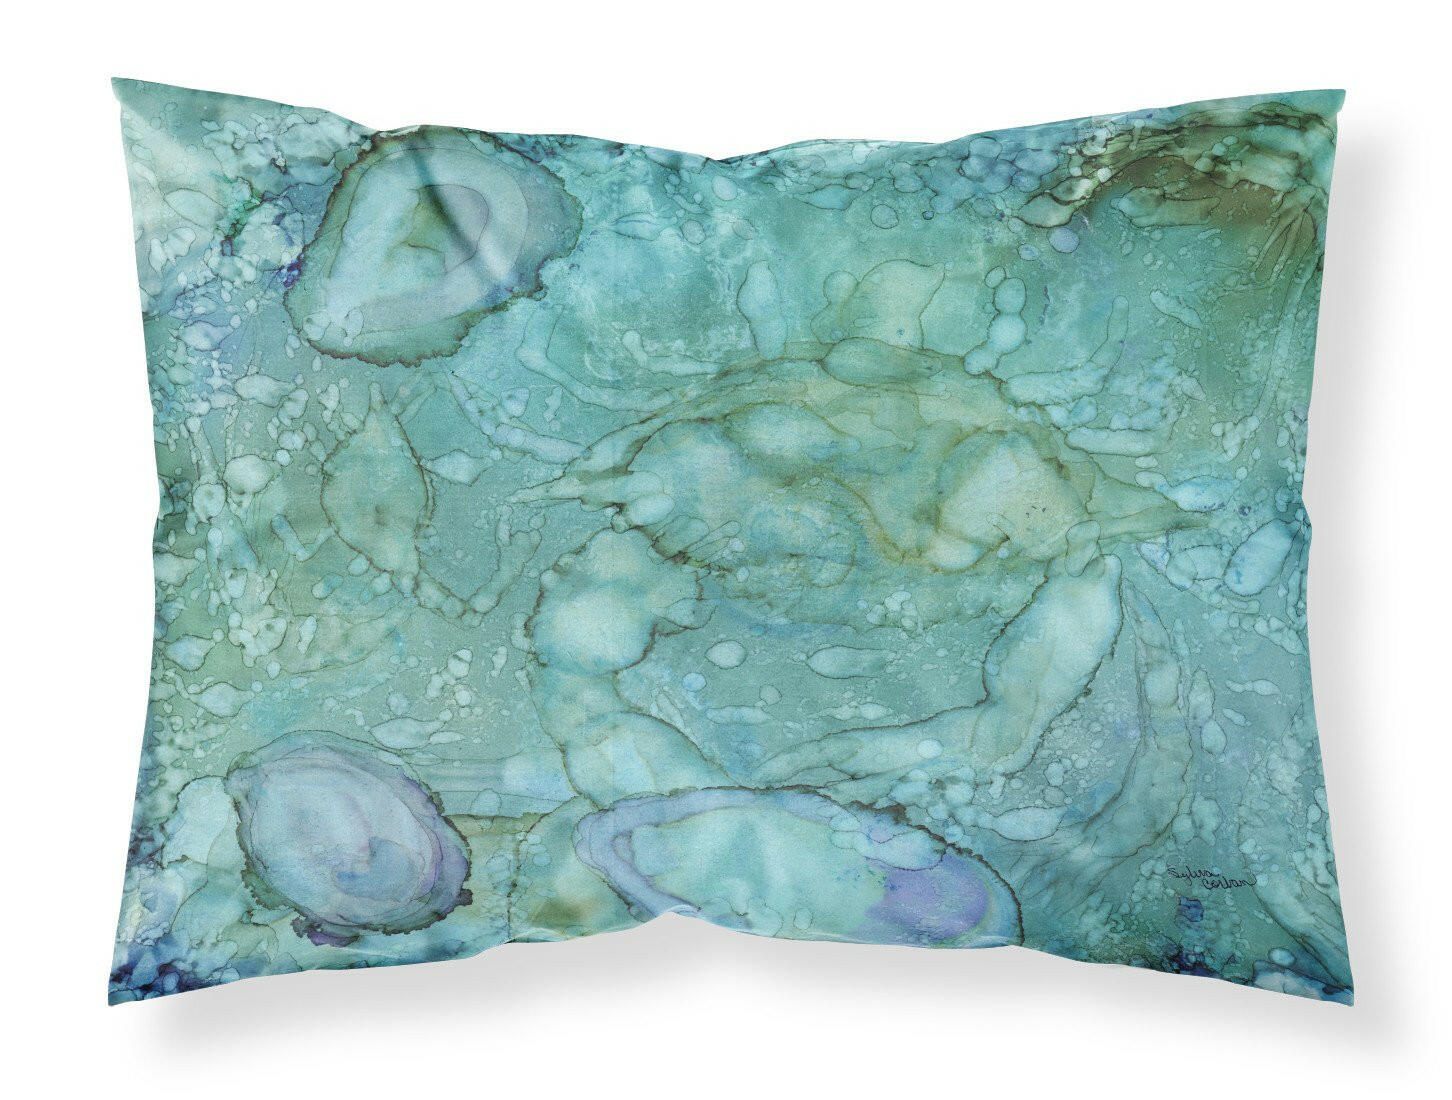 Abstract Crabs and Oysters Fabric Standard Pillowcase 8963PILLOWCASE by Caroline's Treasures